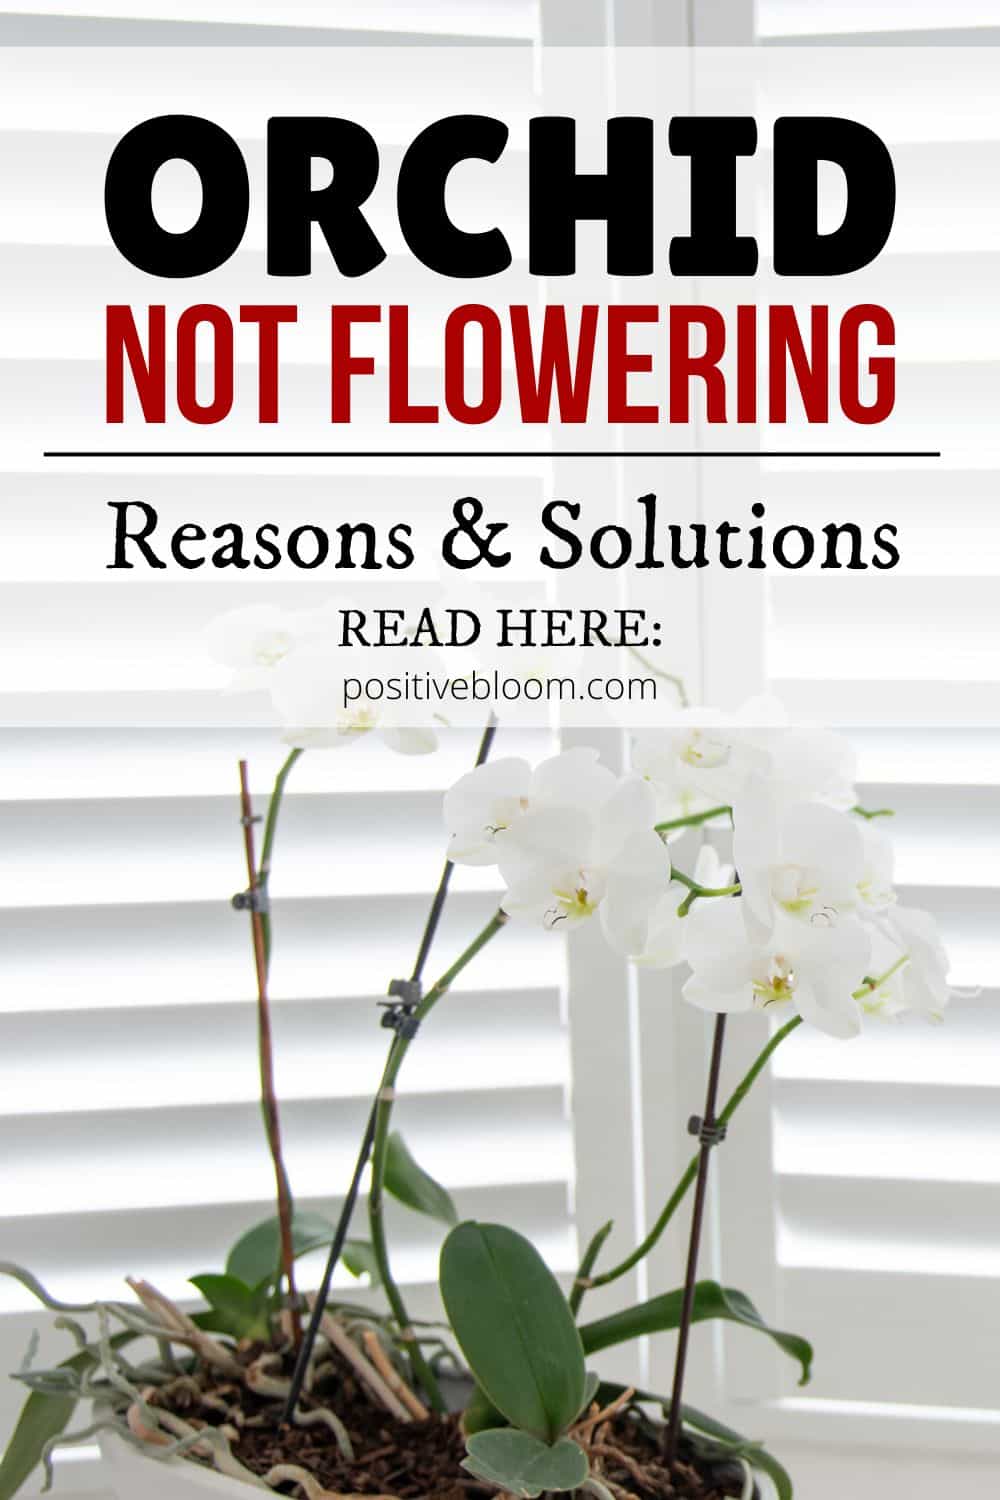 10 Common Reasons And Solutions For An Orchid Not Flowering Pinterest